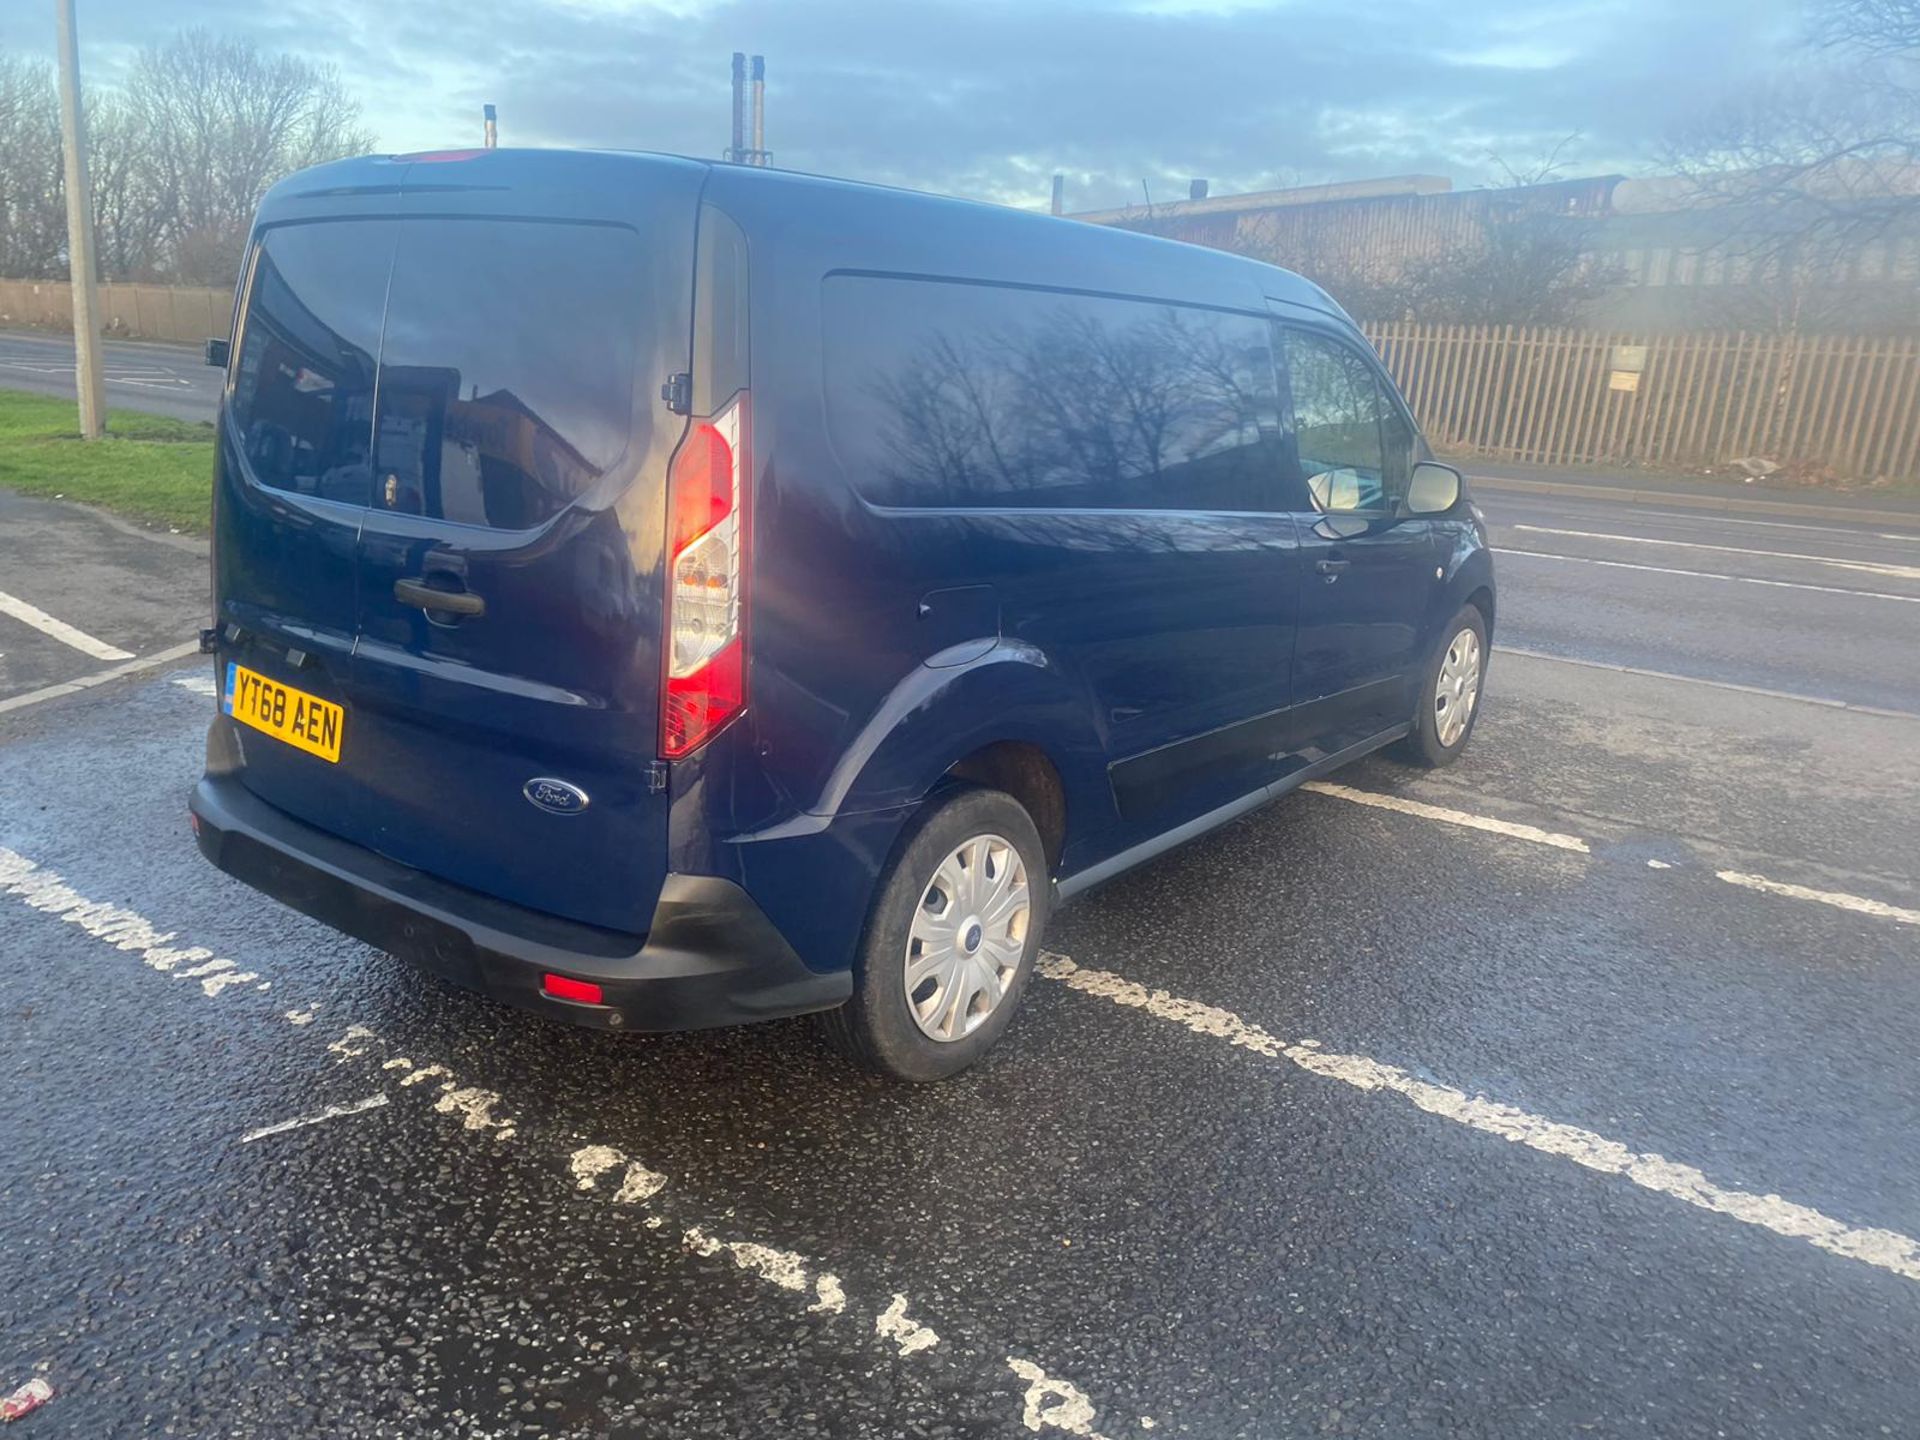 2018 68 FORD TRANSIT CONNECT TREND LWB PANEL VAN - 3 SEATS - NEWER SHAPE - AIR CON. - Image 5 of 9